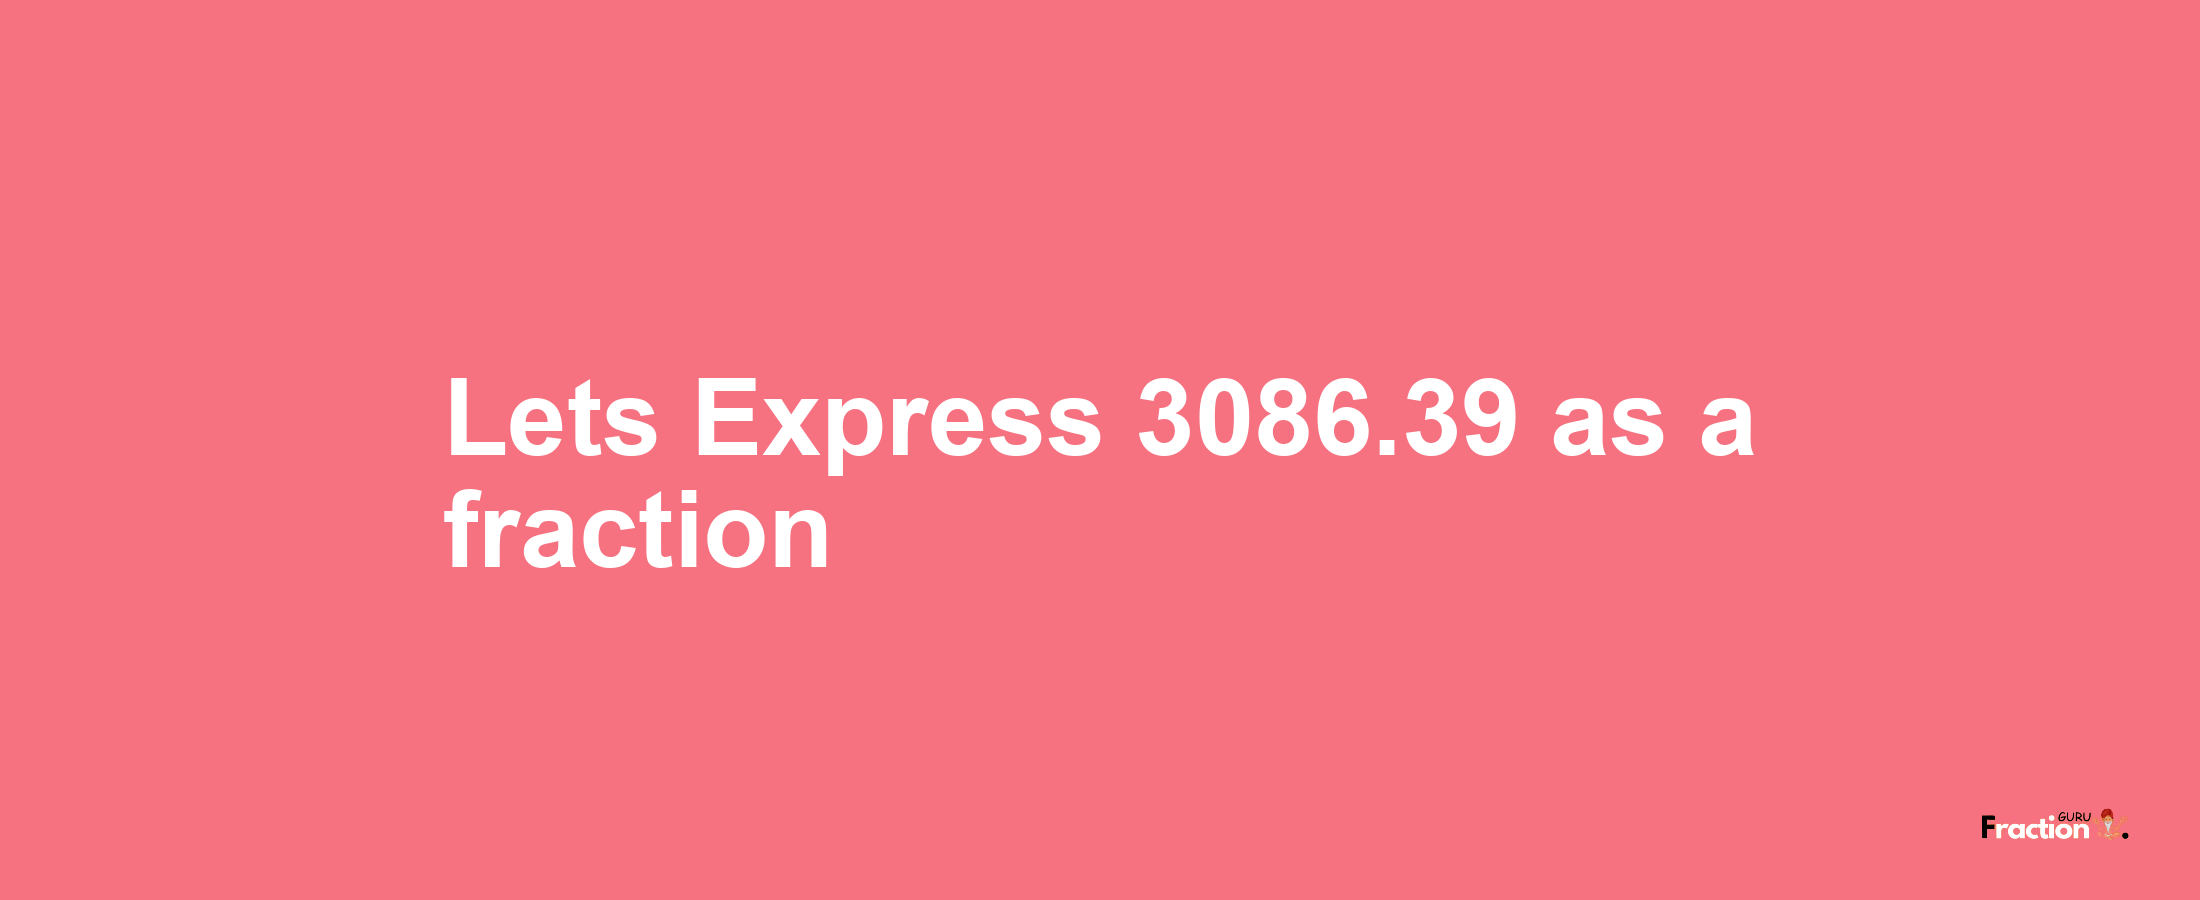 Lets Express 3086.39 as afraction